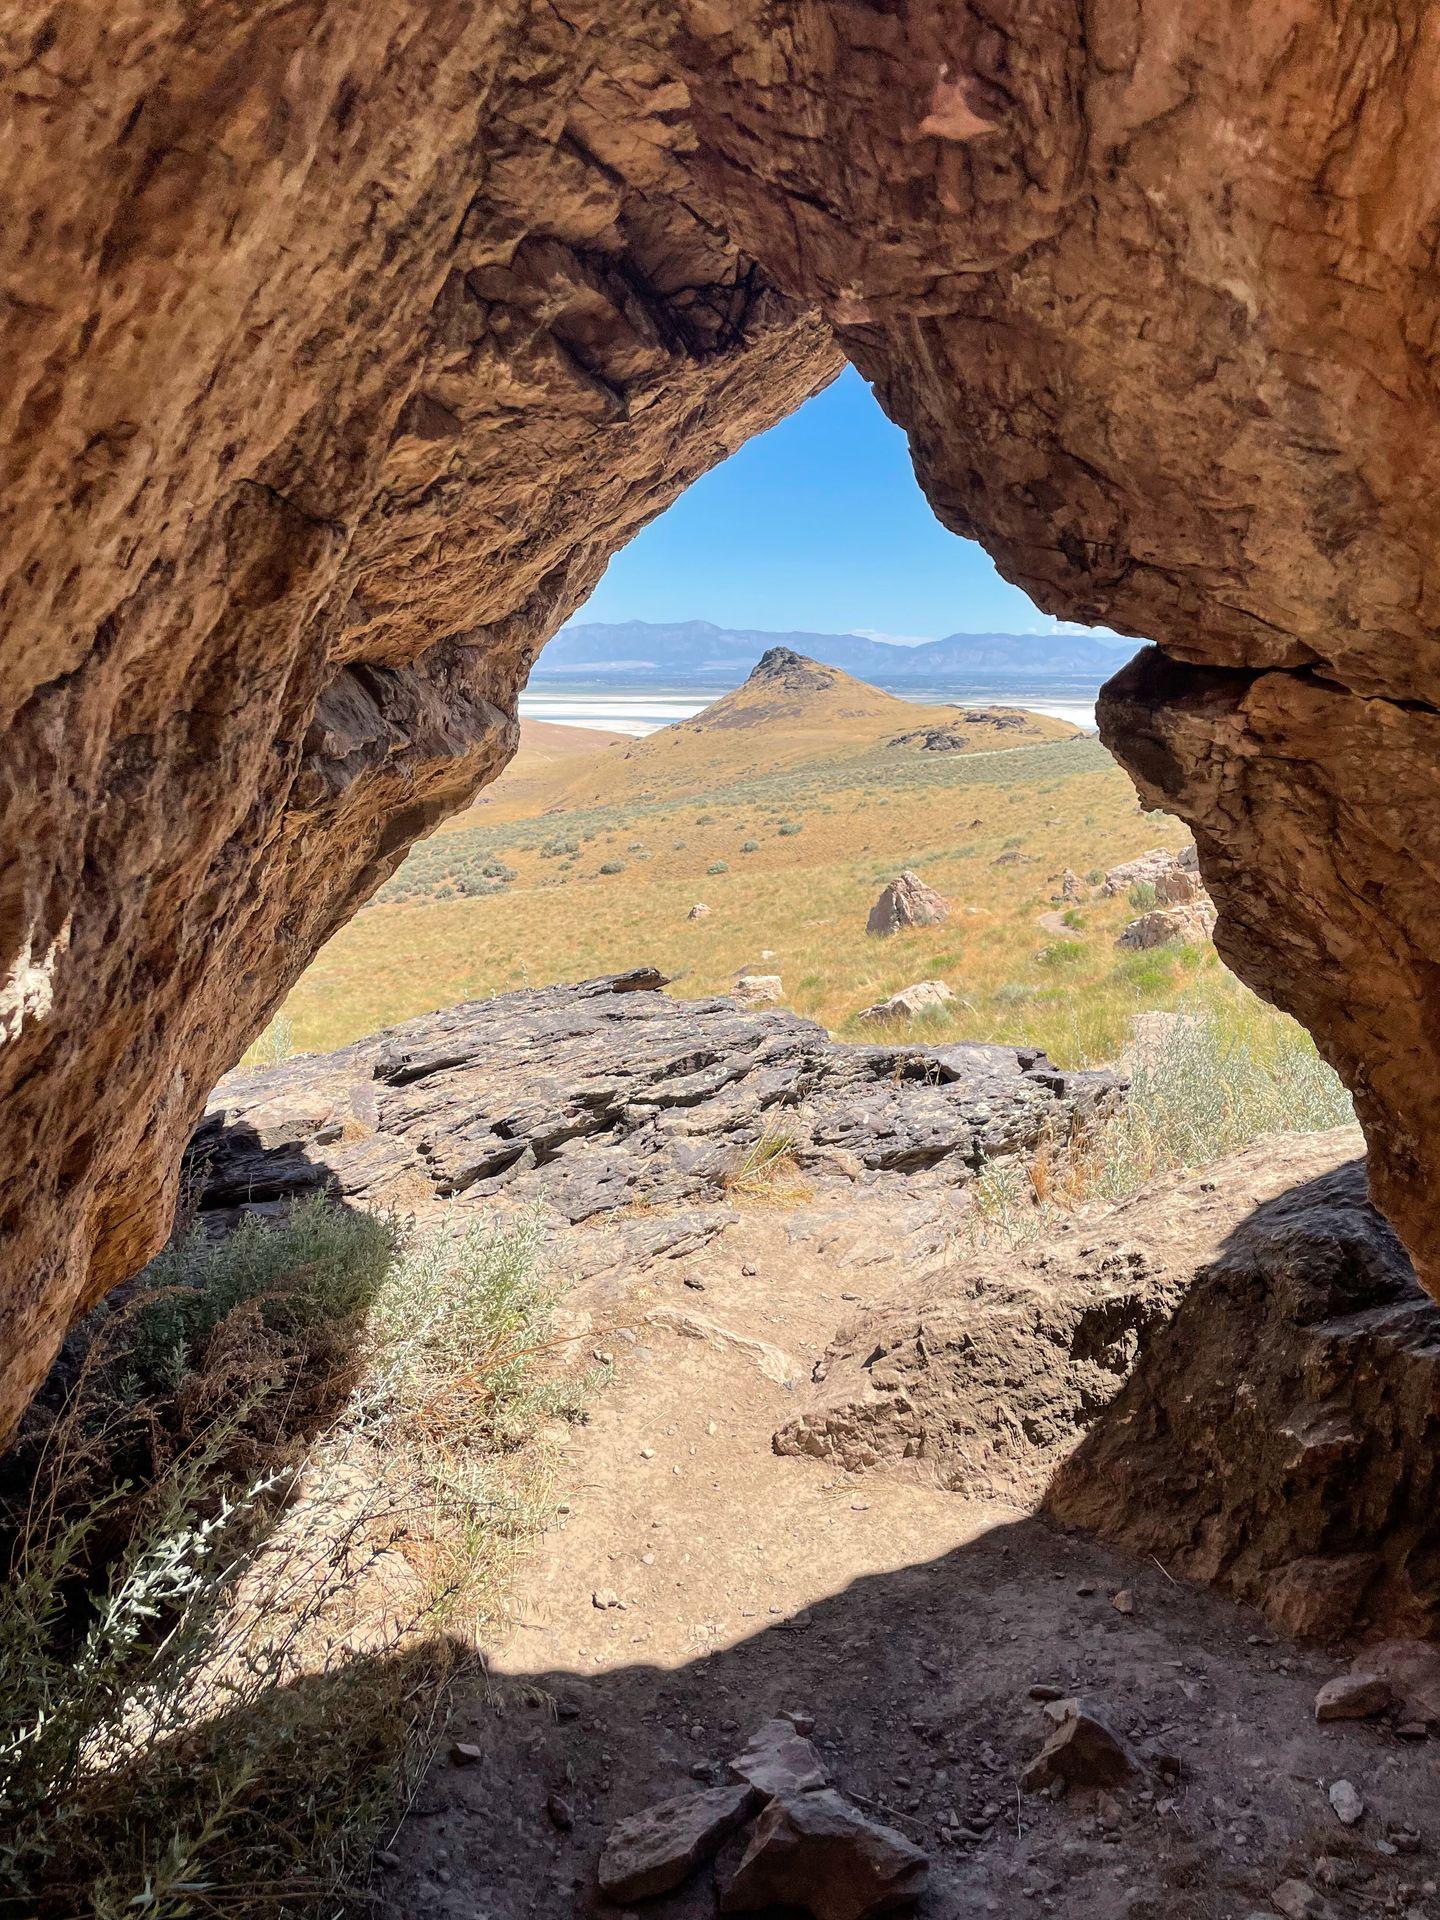 Looking through a rock arch on the Frary Peak trail.